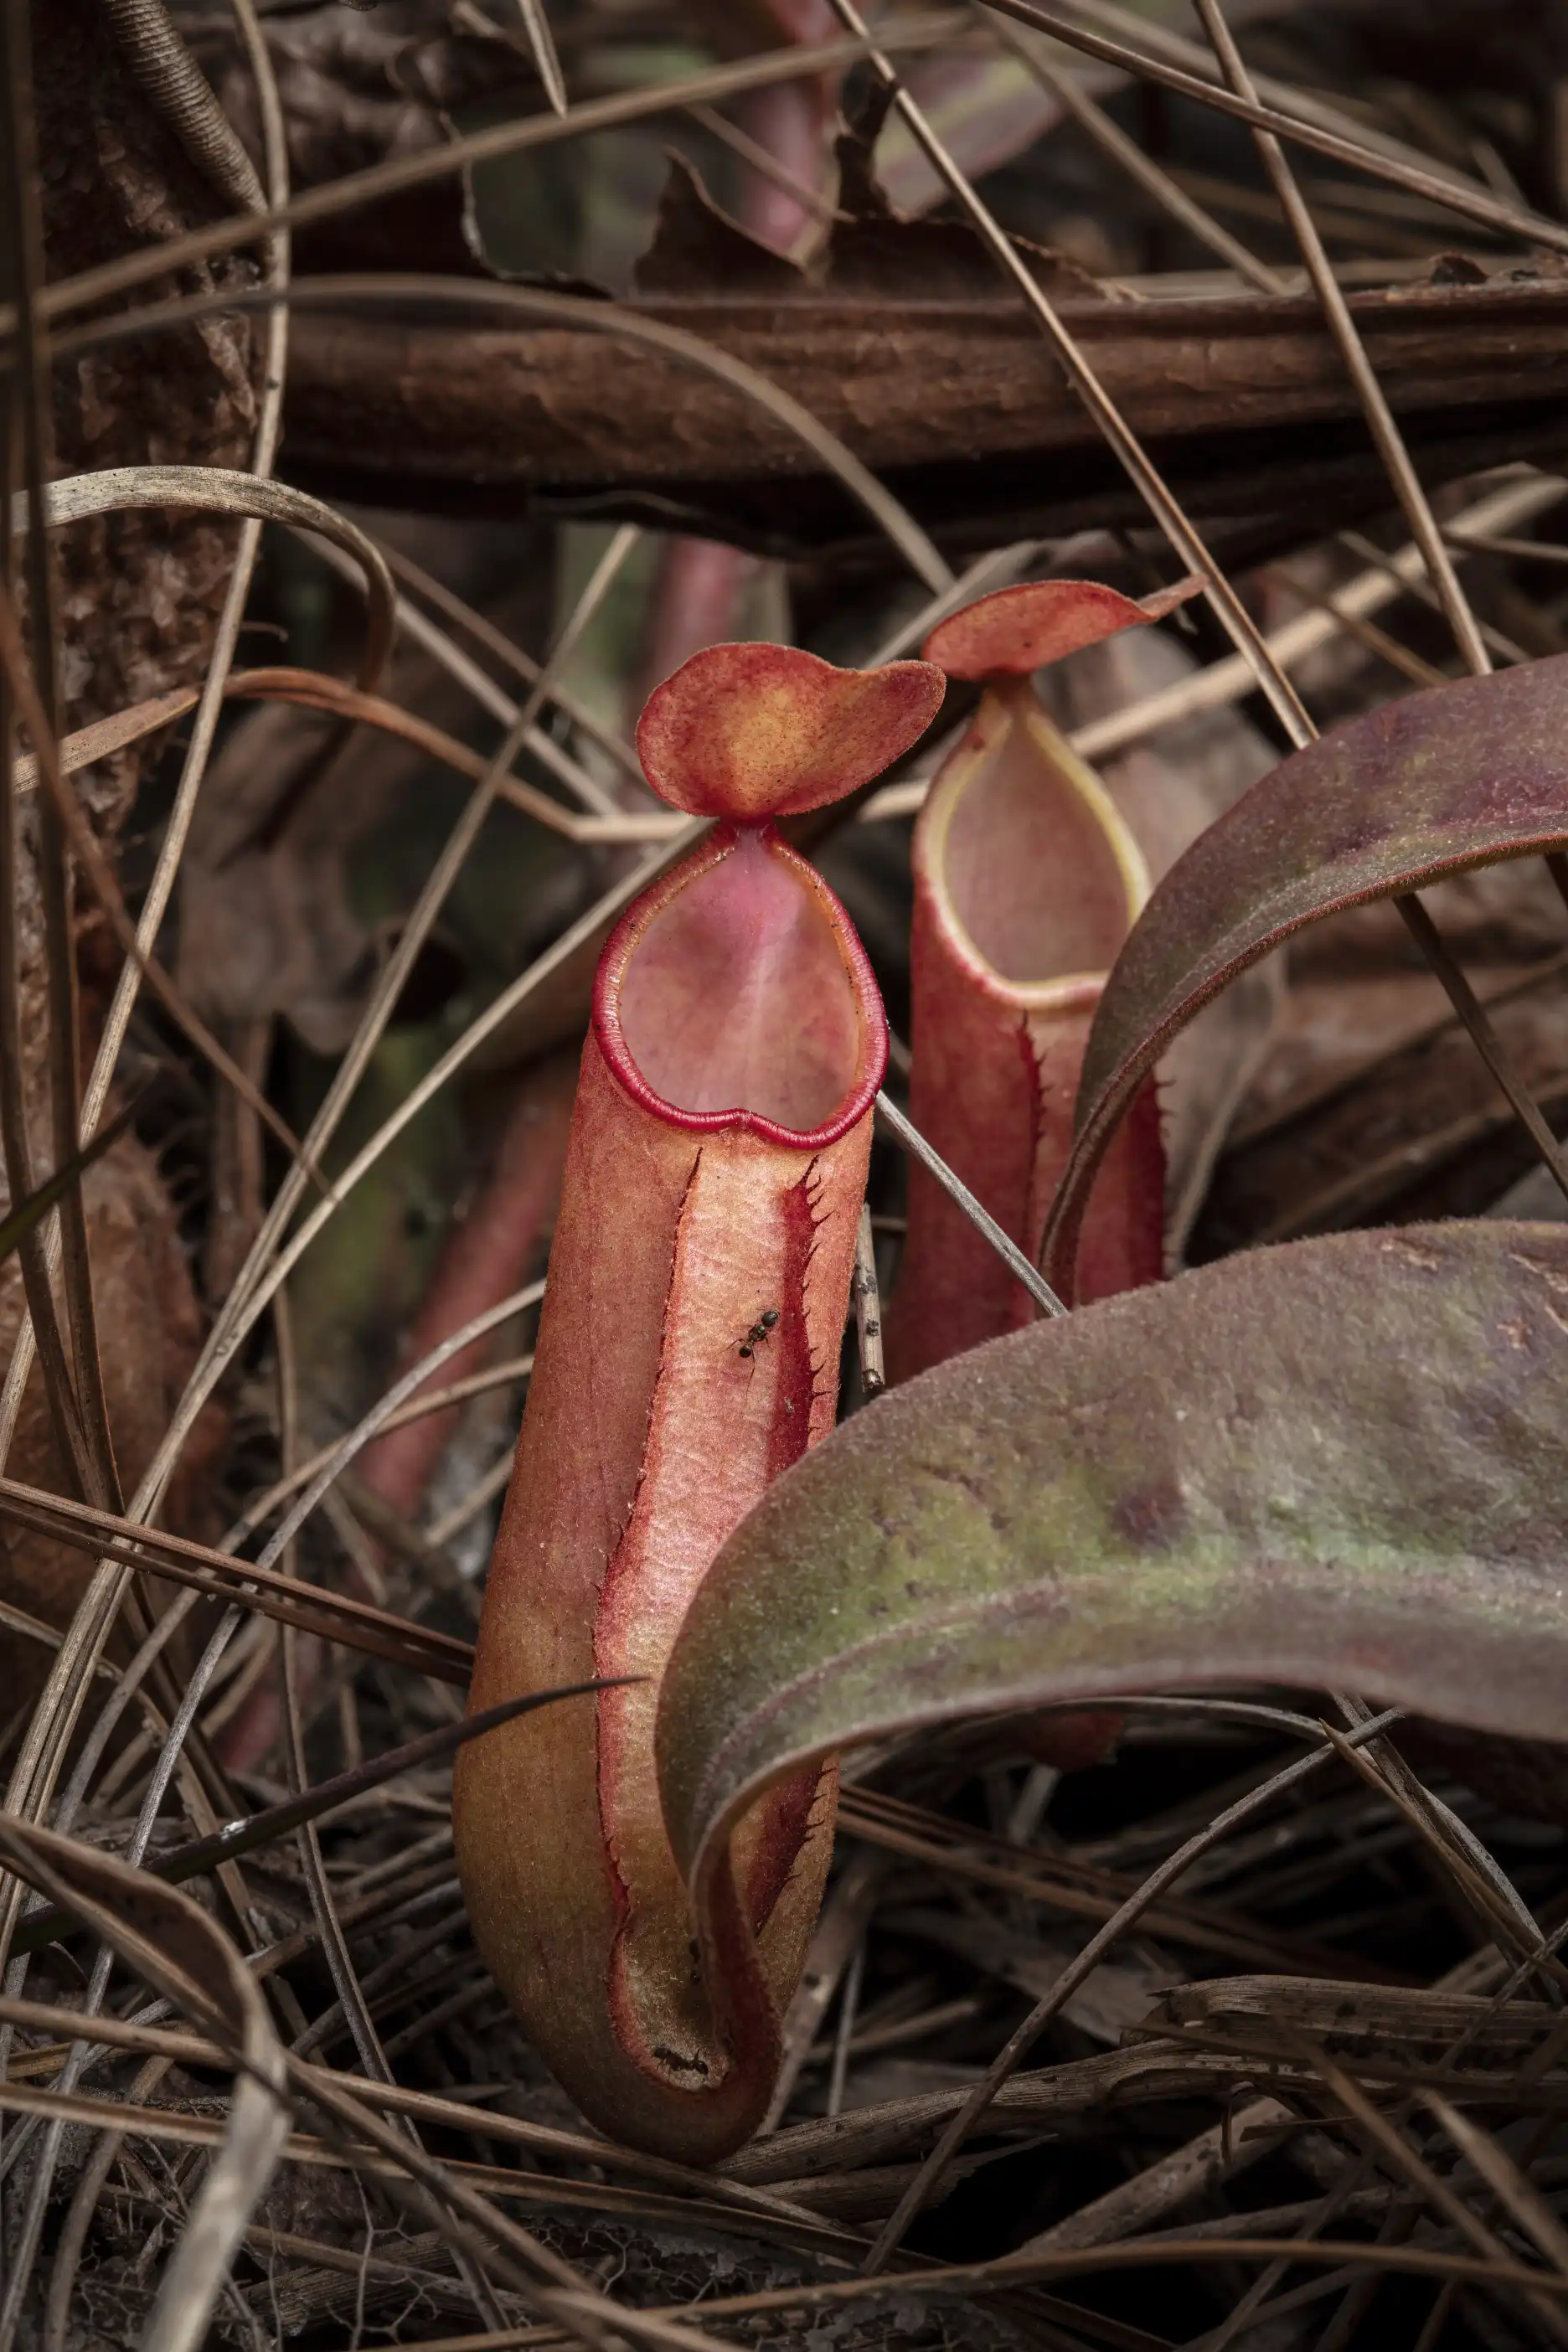 Two Nepenthes smilesii pitchers with an ant